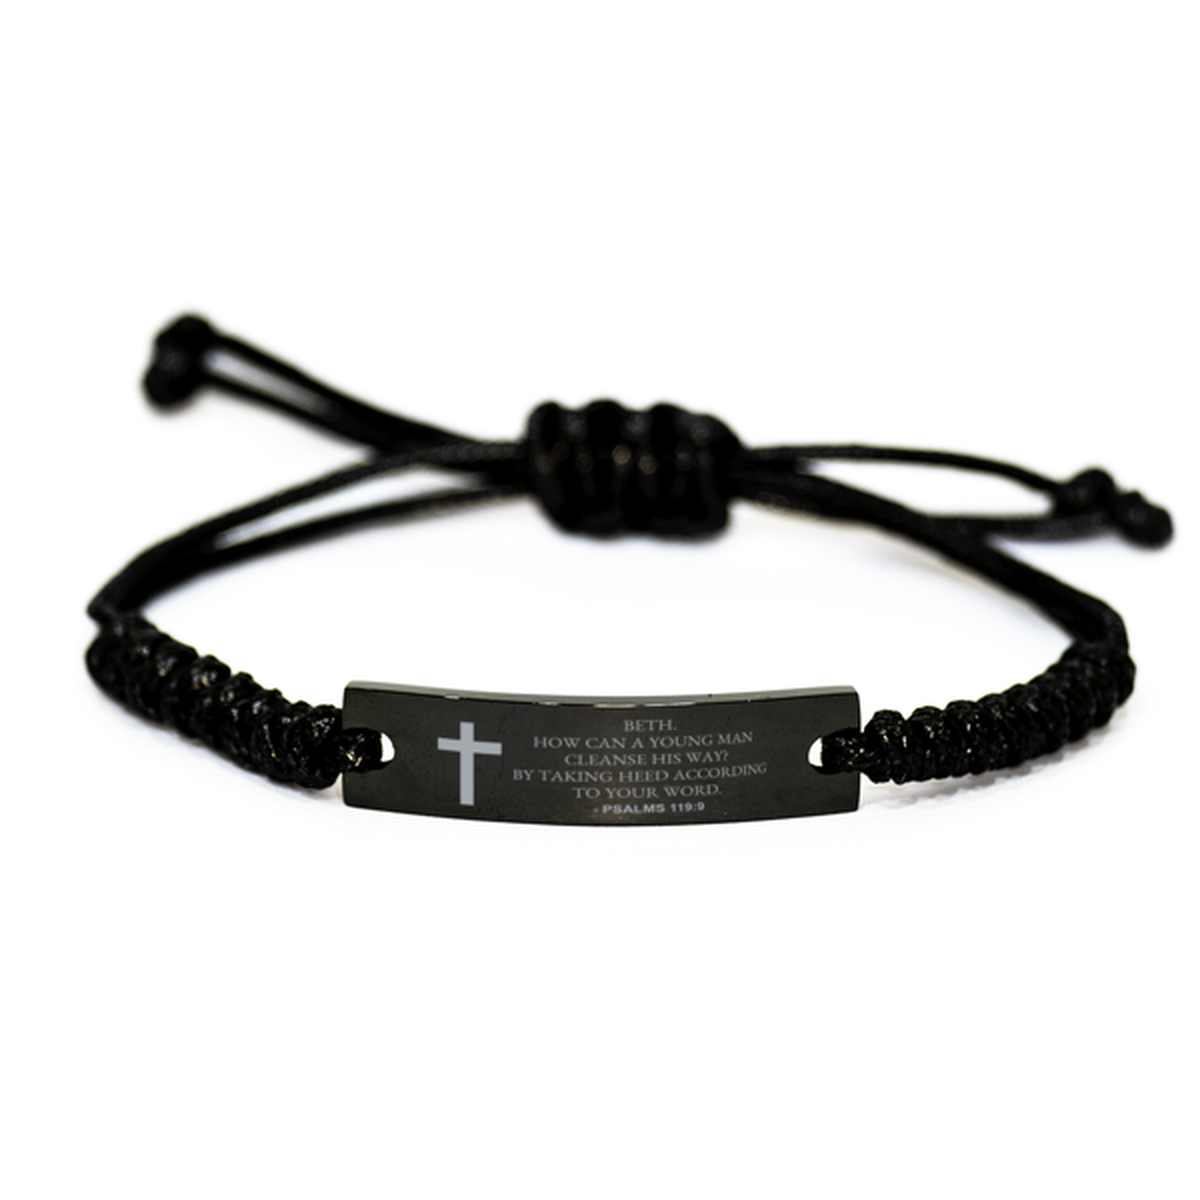 Bible Verse Rope Bracelet, Psalms 119:9 Beth. How Can A Young Man Cleanse His Way? By, Christian Encouraging Gifts For Men Women Boys Girls